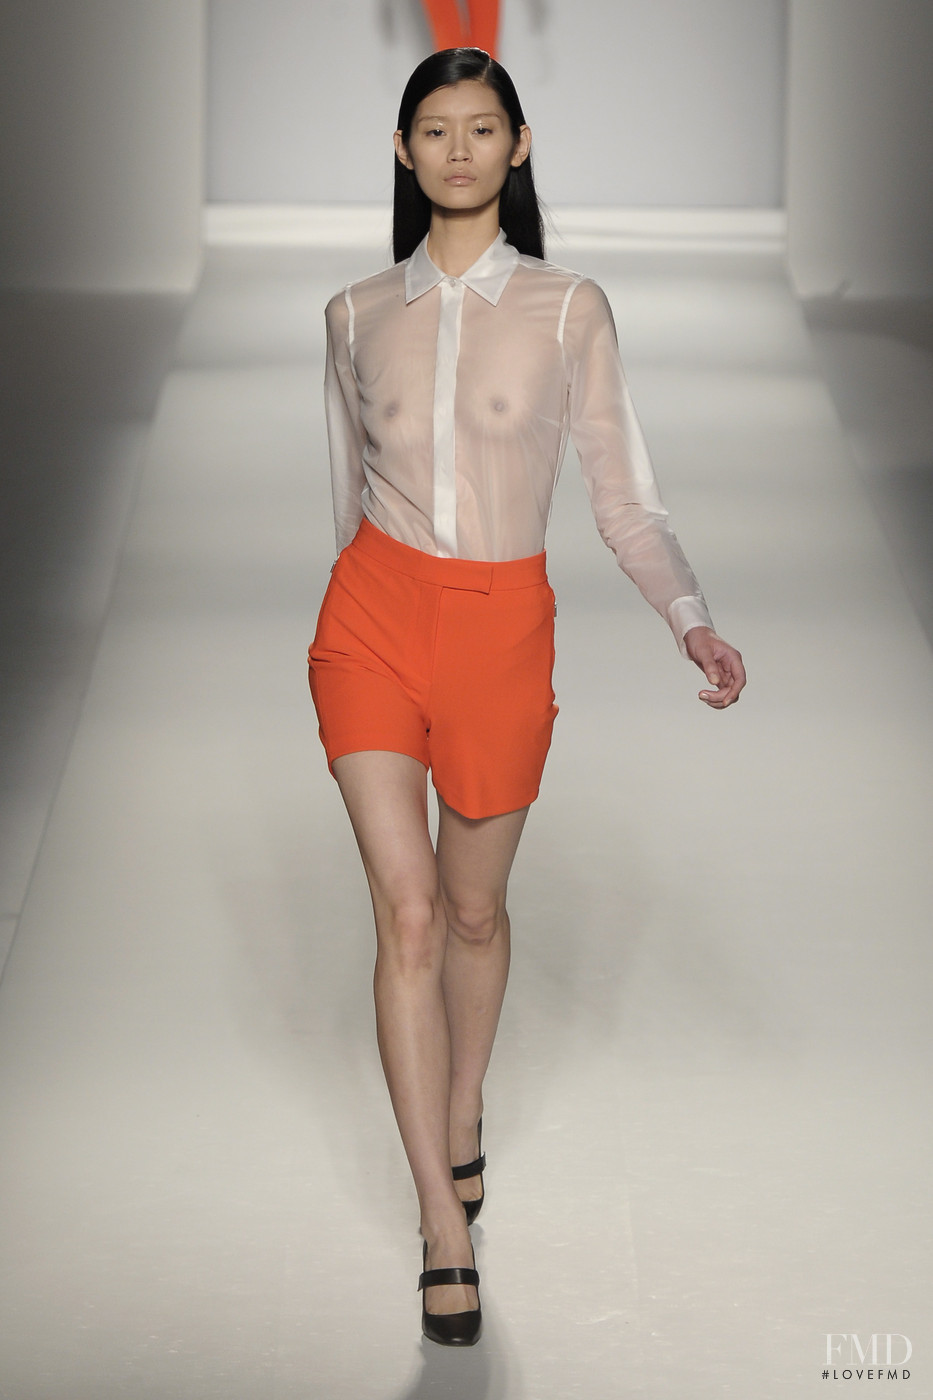 Ming Xi featured in the Max Mara fashion show for Spring/Summer 2011.